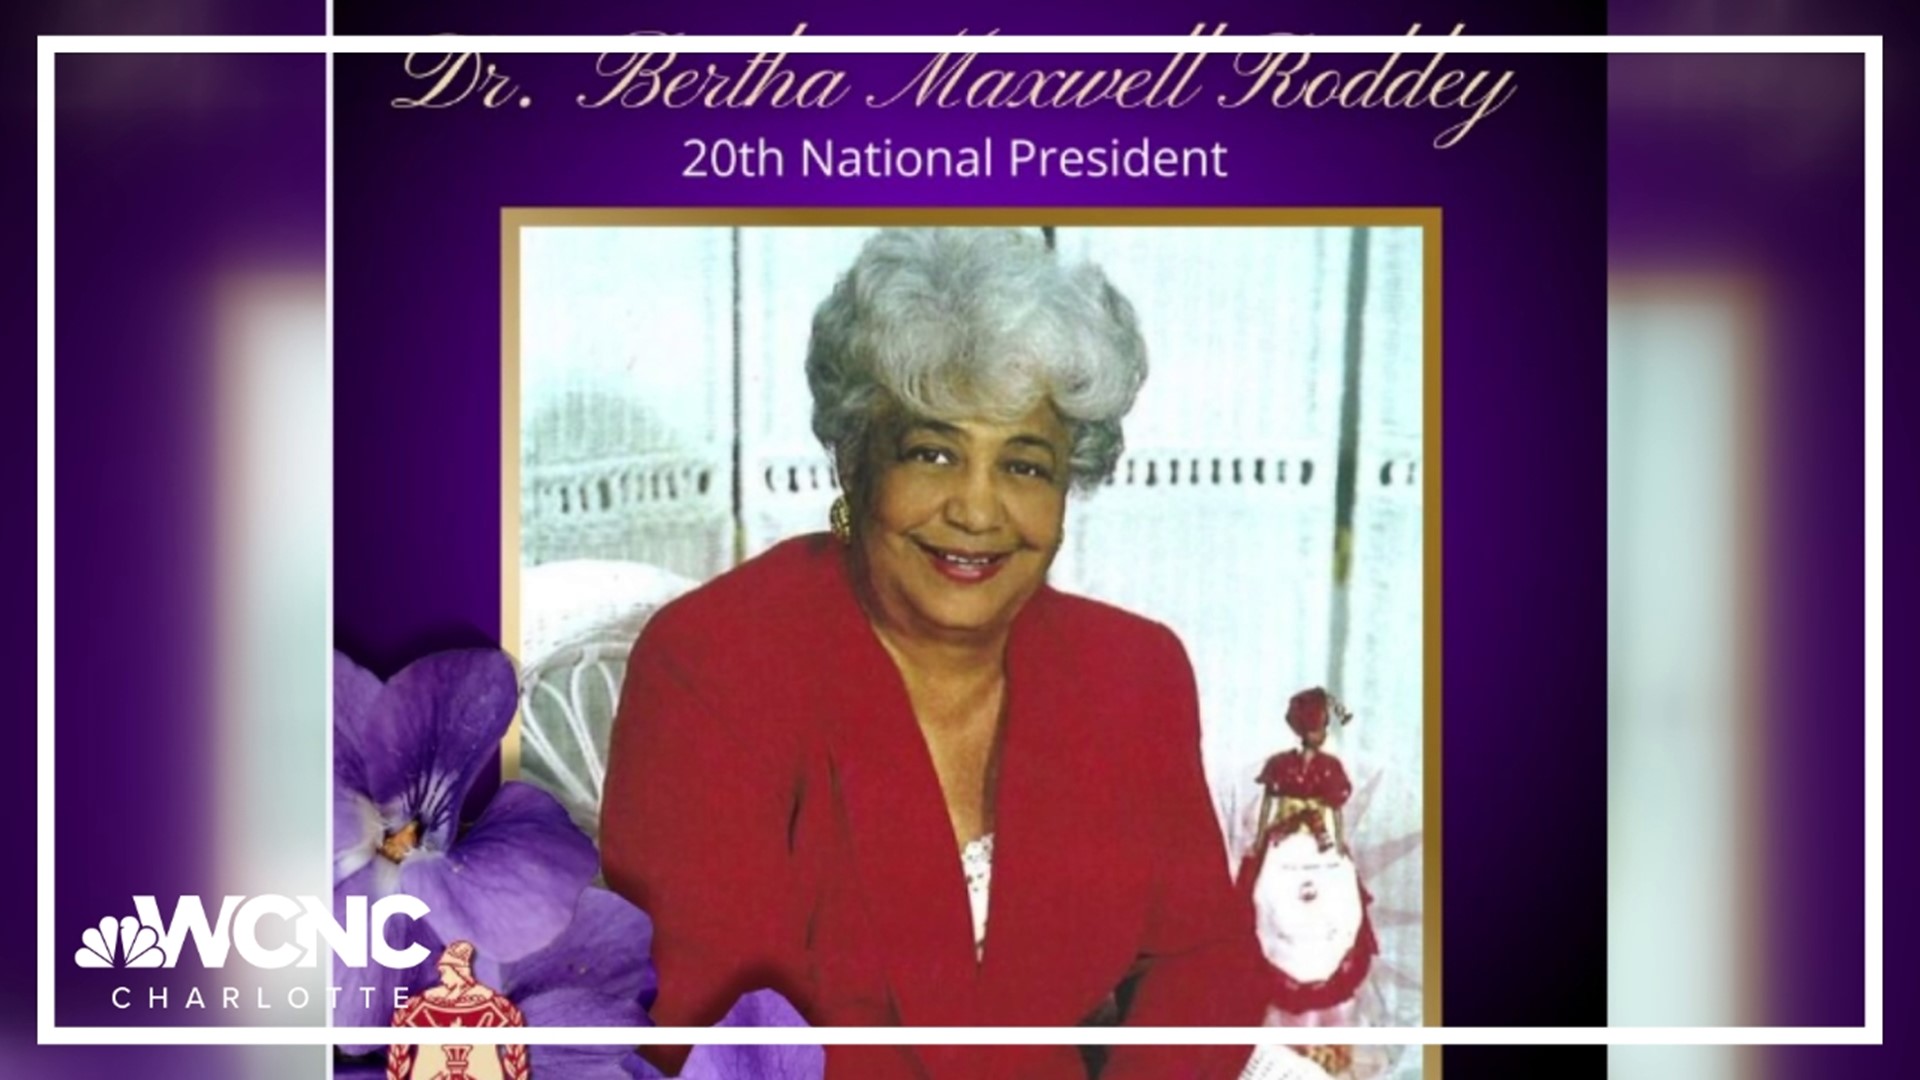 Bertha Maxwell-Roddey was revered by people who knew her as a groundbreaking leader and educator in the Charlotte community.